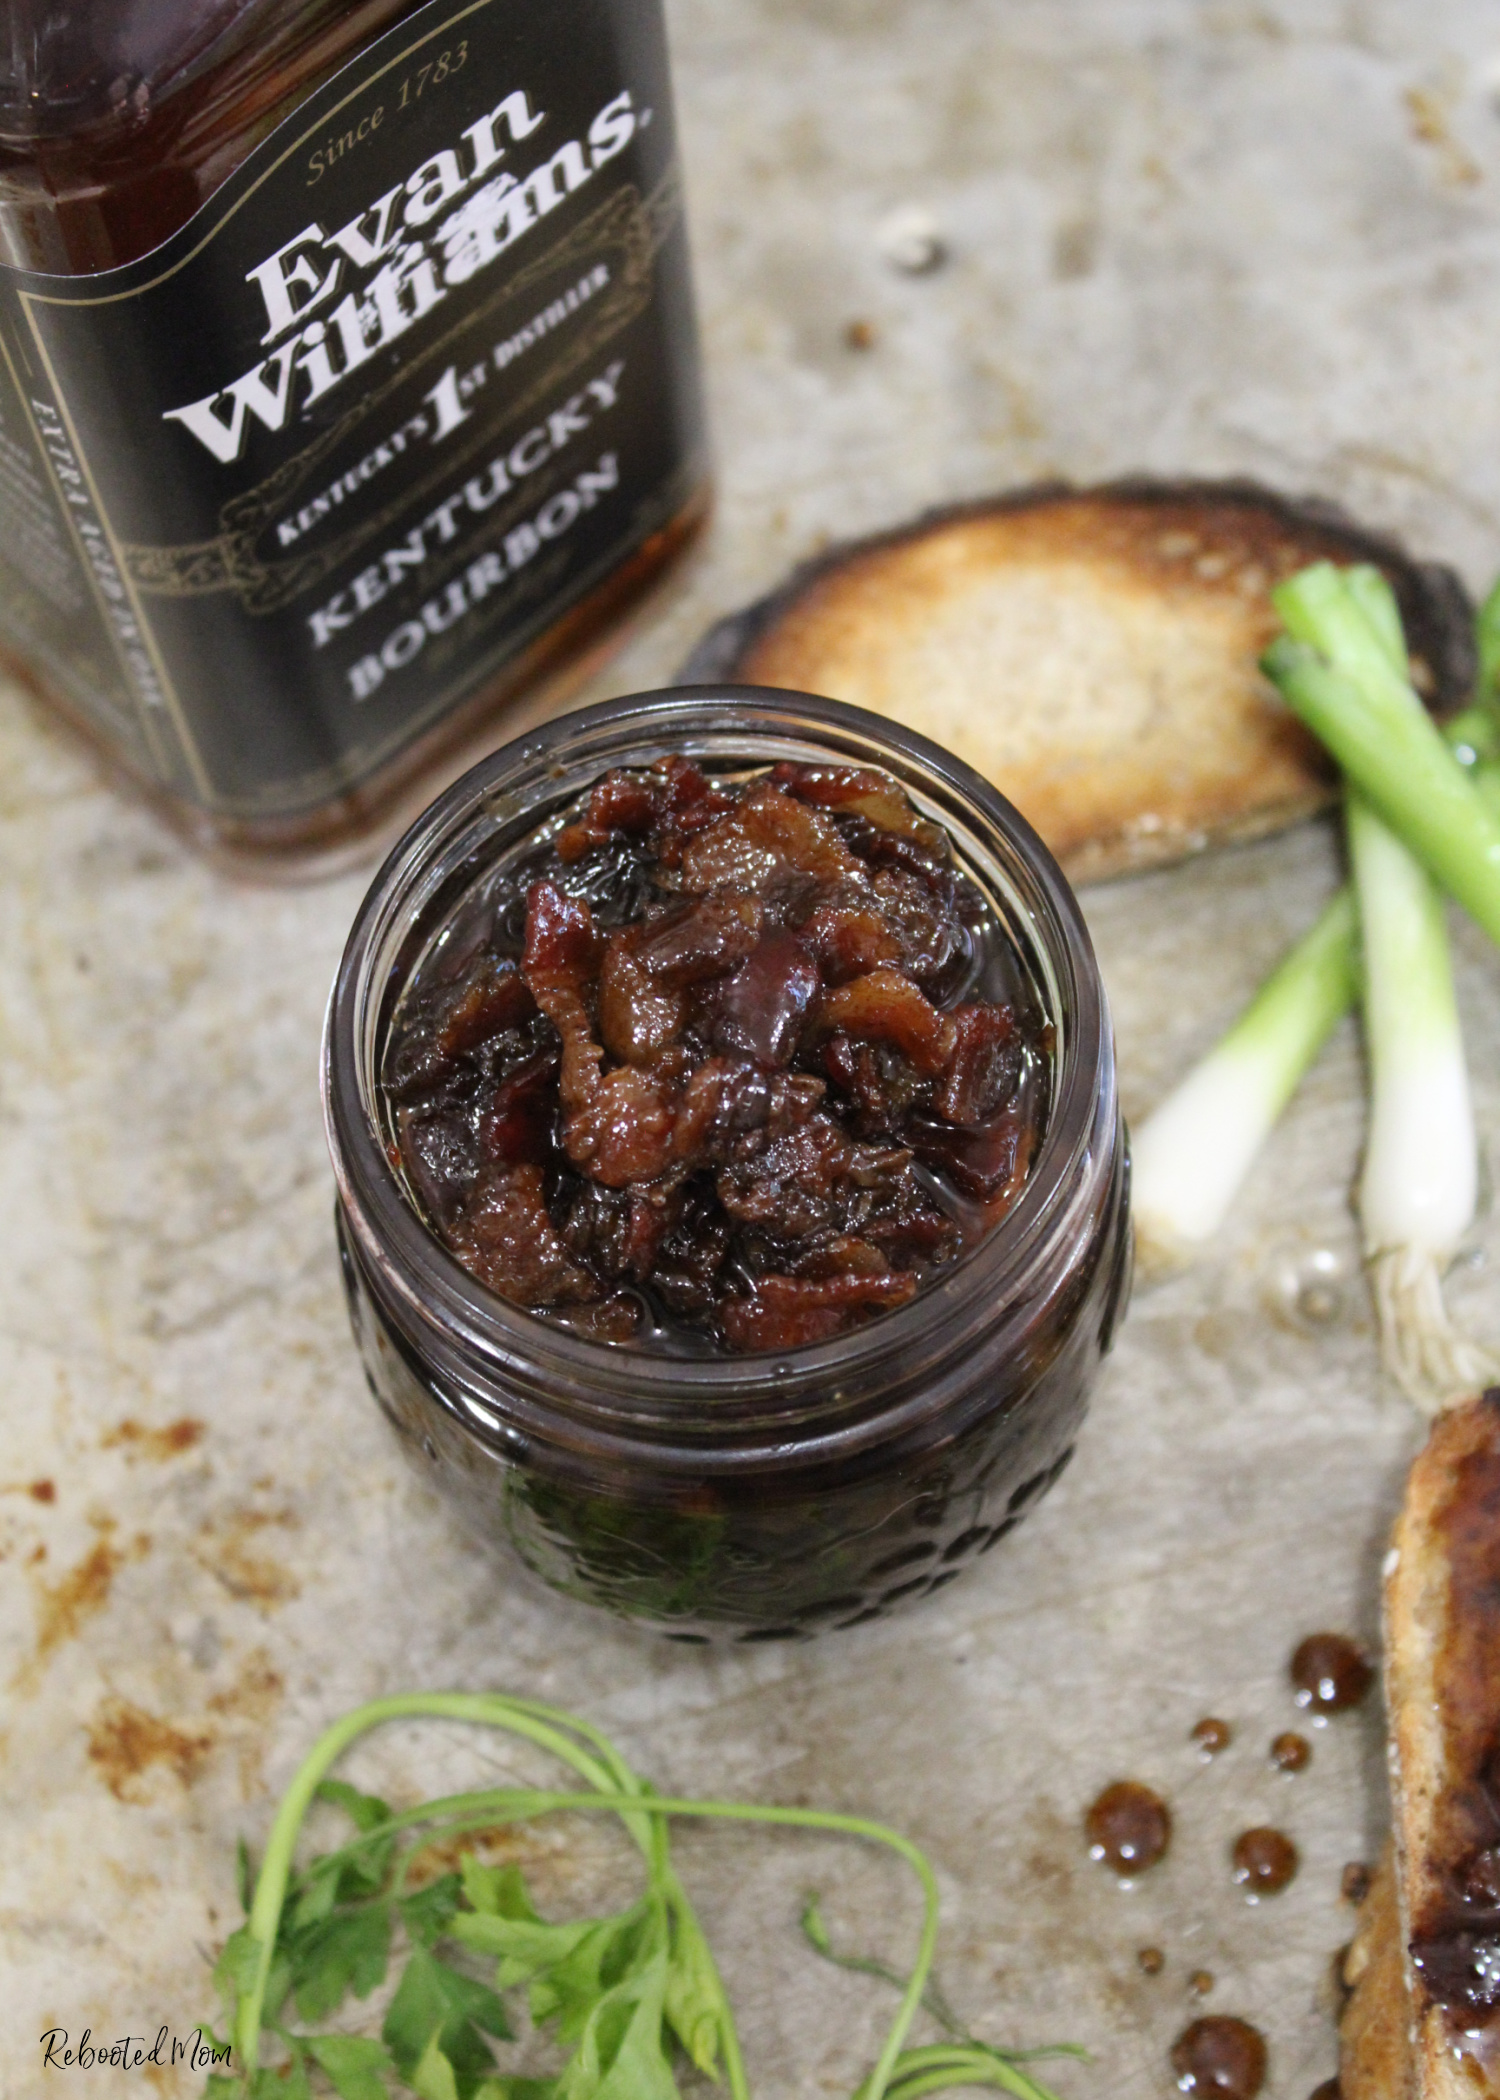 Bourbon Bacon Jam brings together both bourbon and bacon in a jam that's highly addictive and absolutely delicious!